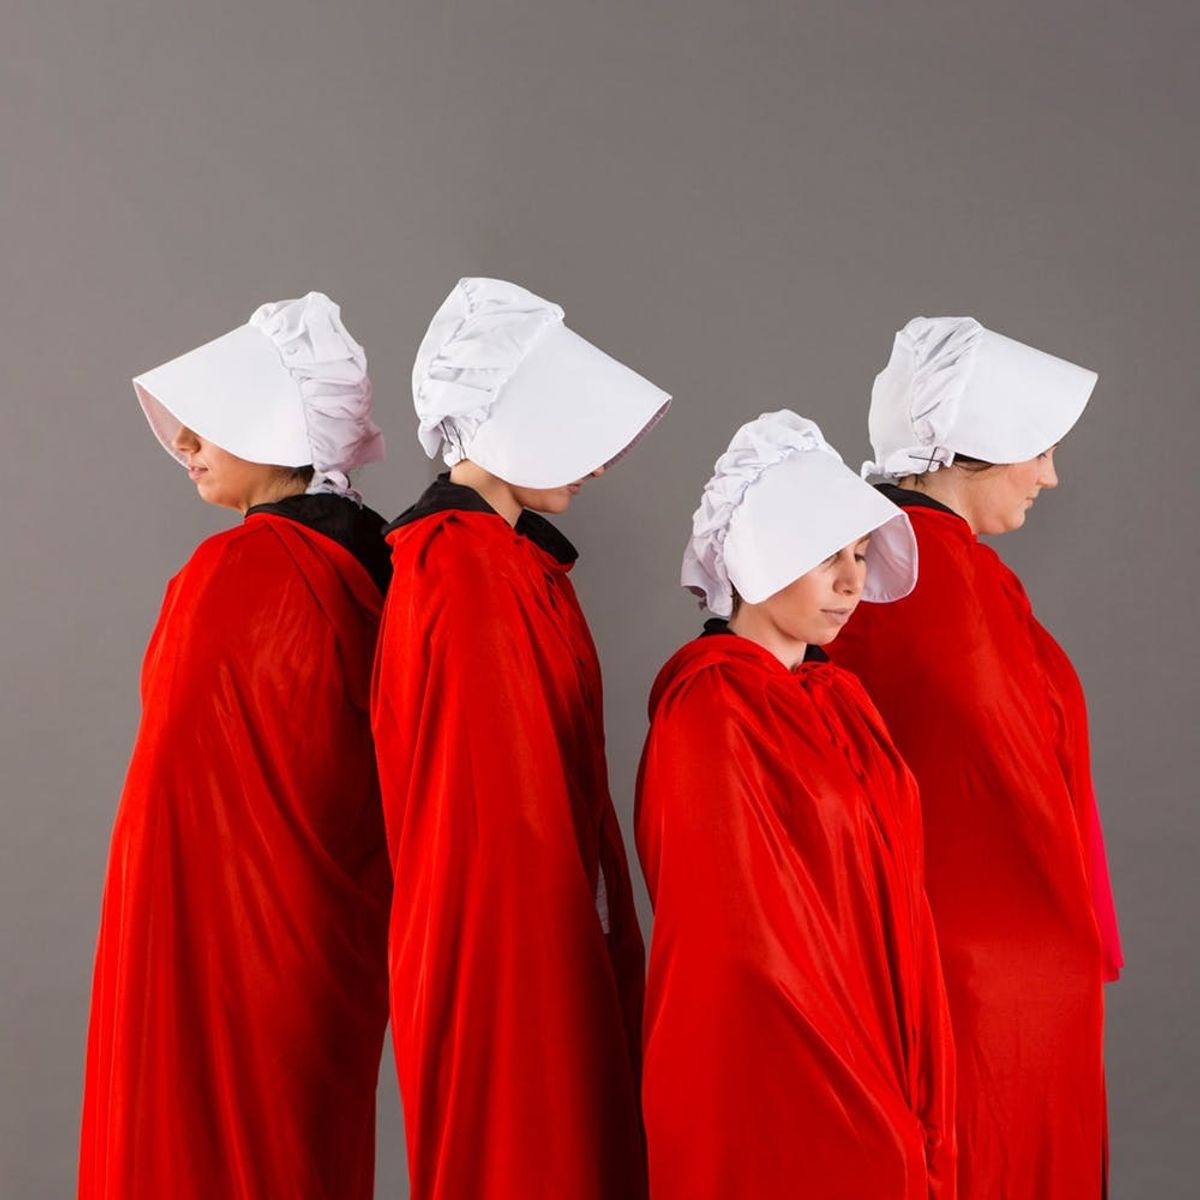 Assemble Your Squad for This Handmaid’s Tale Group Halloween Costume